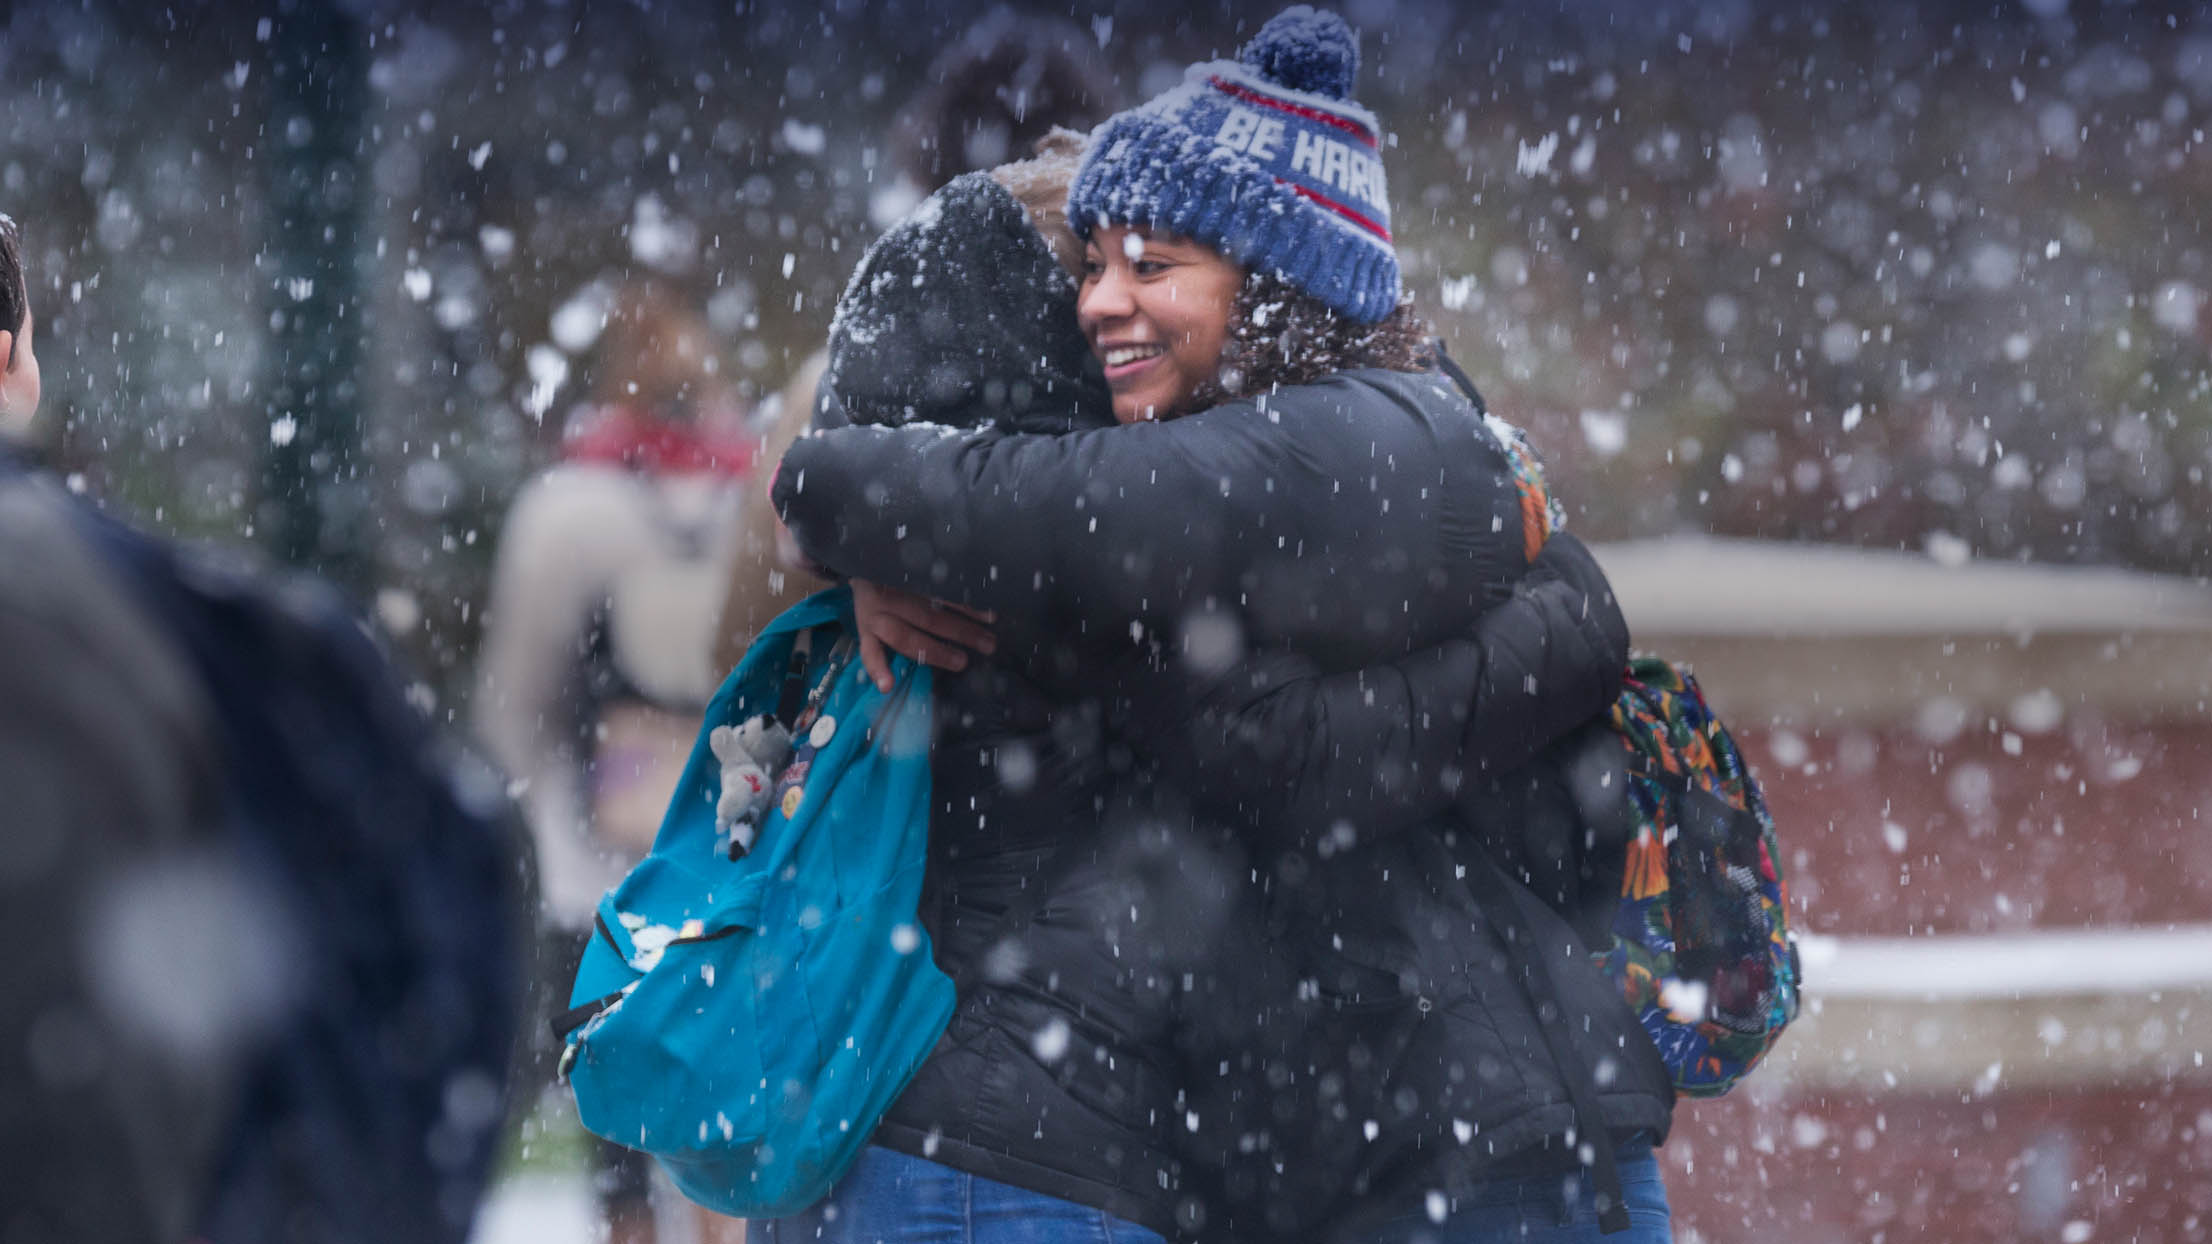 Willamette students hugging on a snowy day